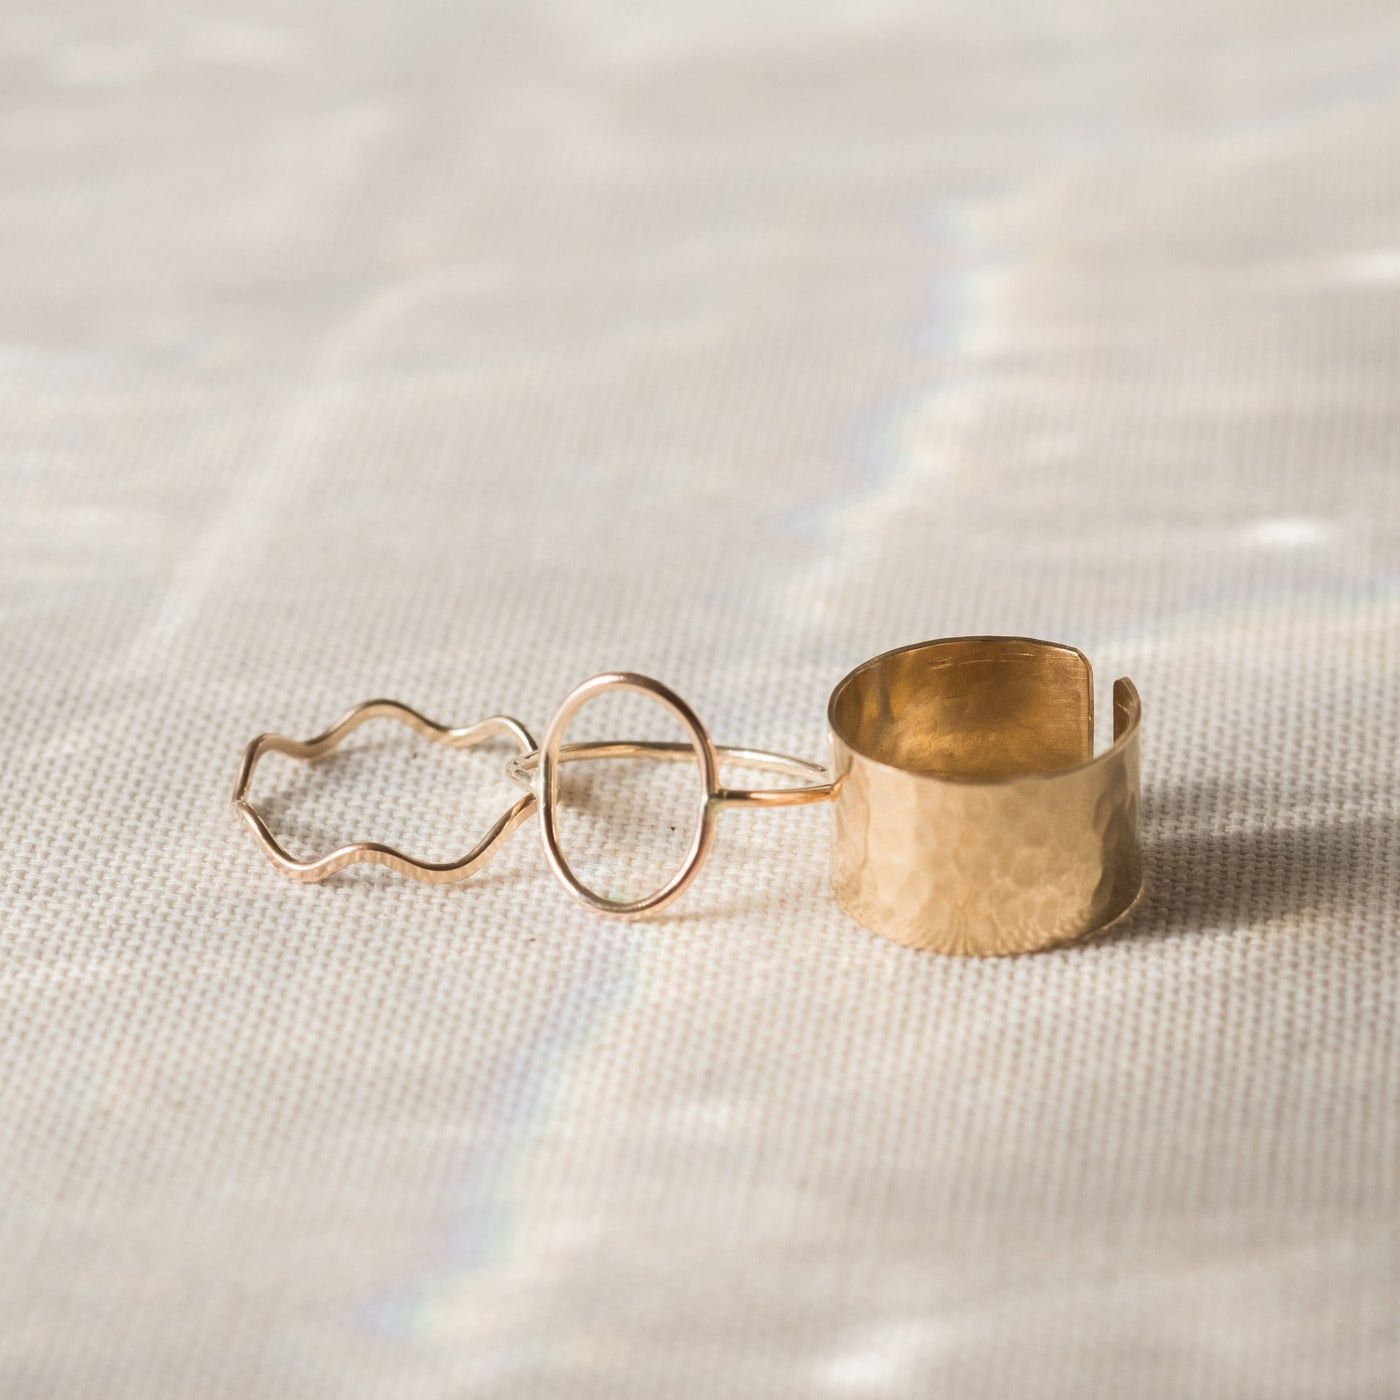 Open Oval Ring | Simple & Dainty Jewelry